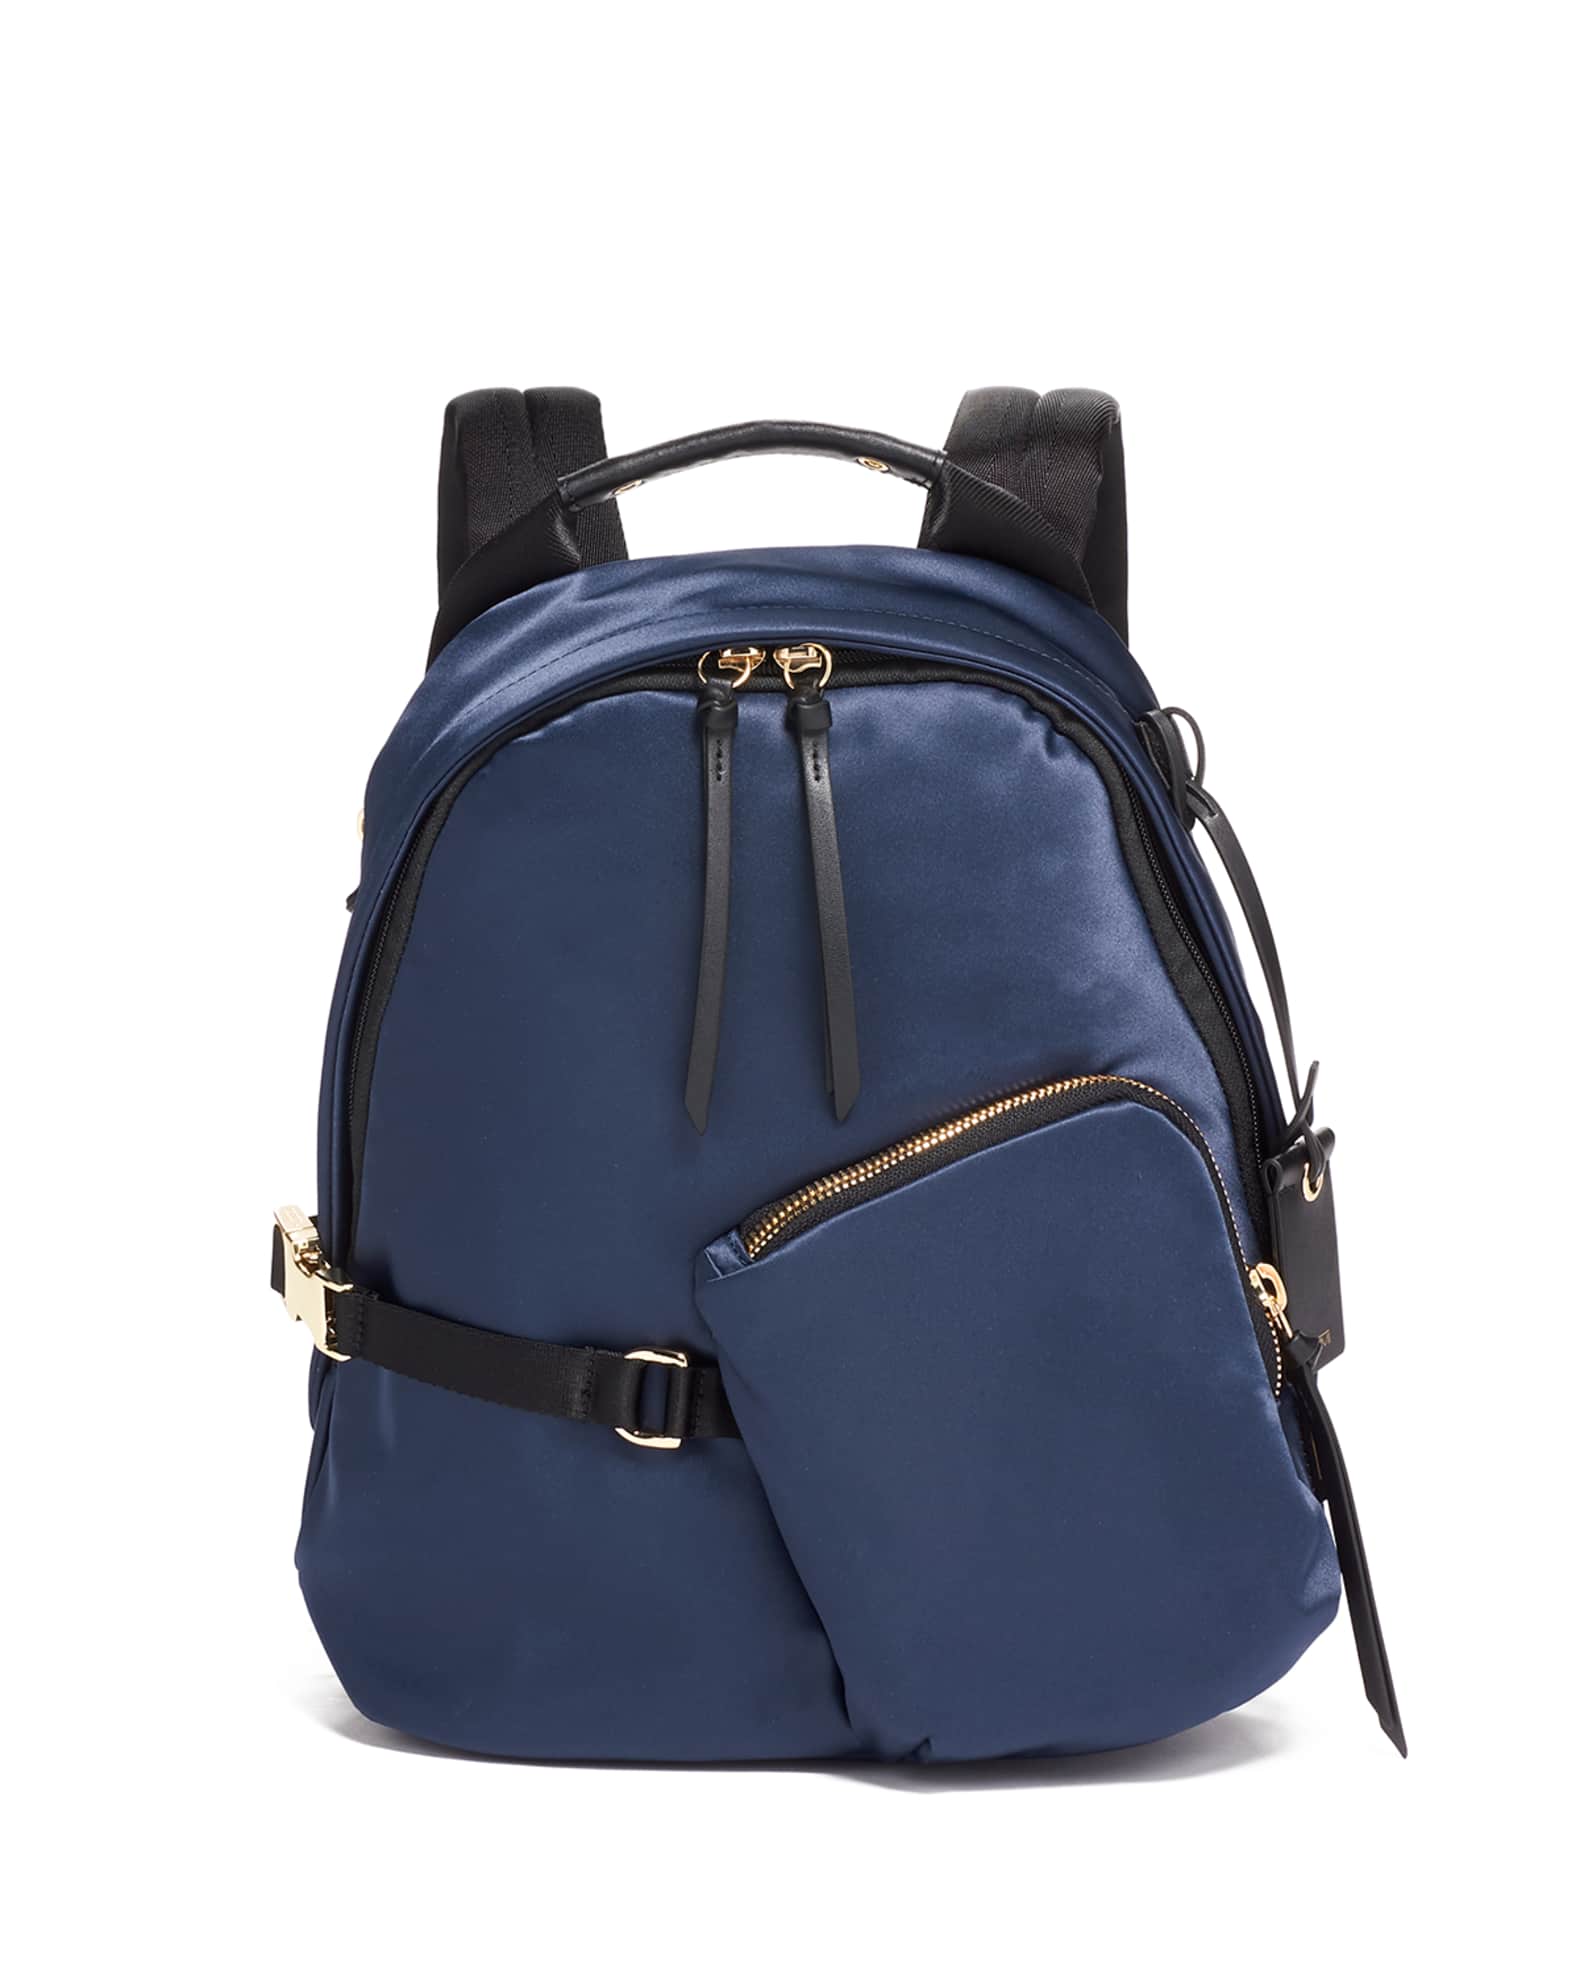 TUMI Devoe Sterling Backpack | Horchow